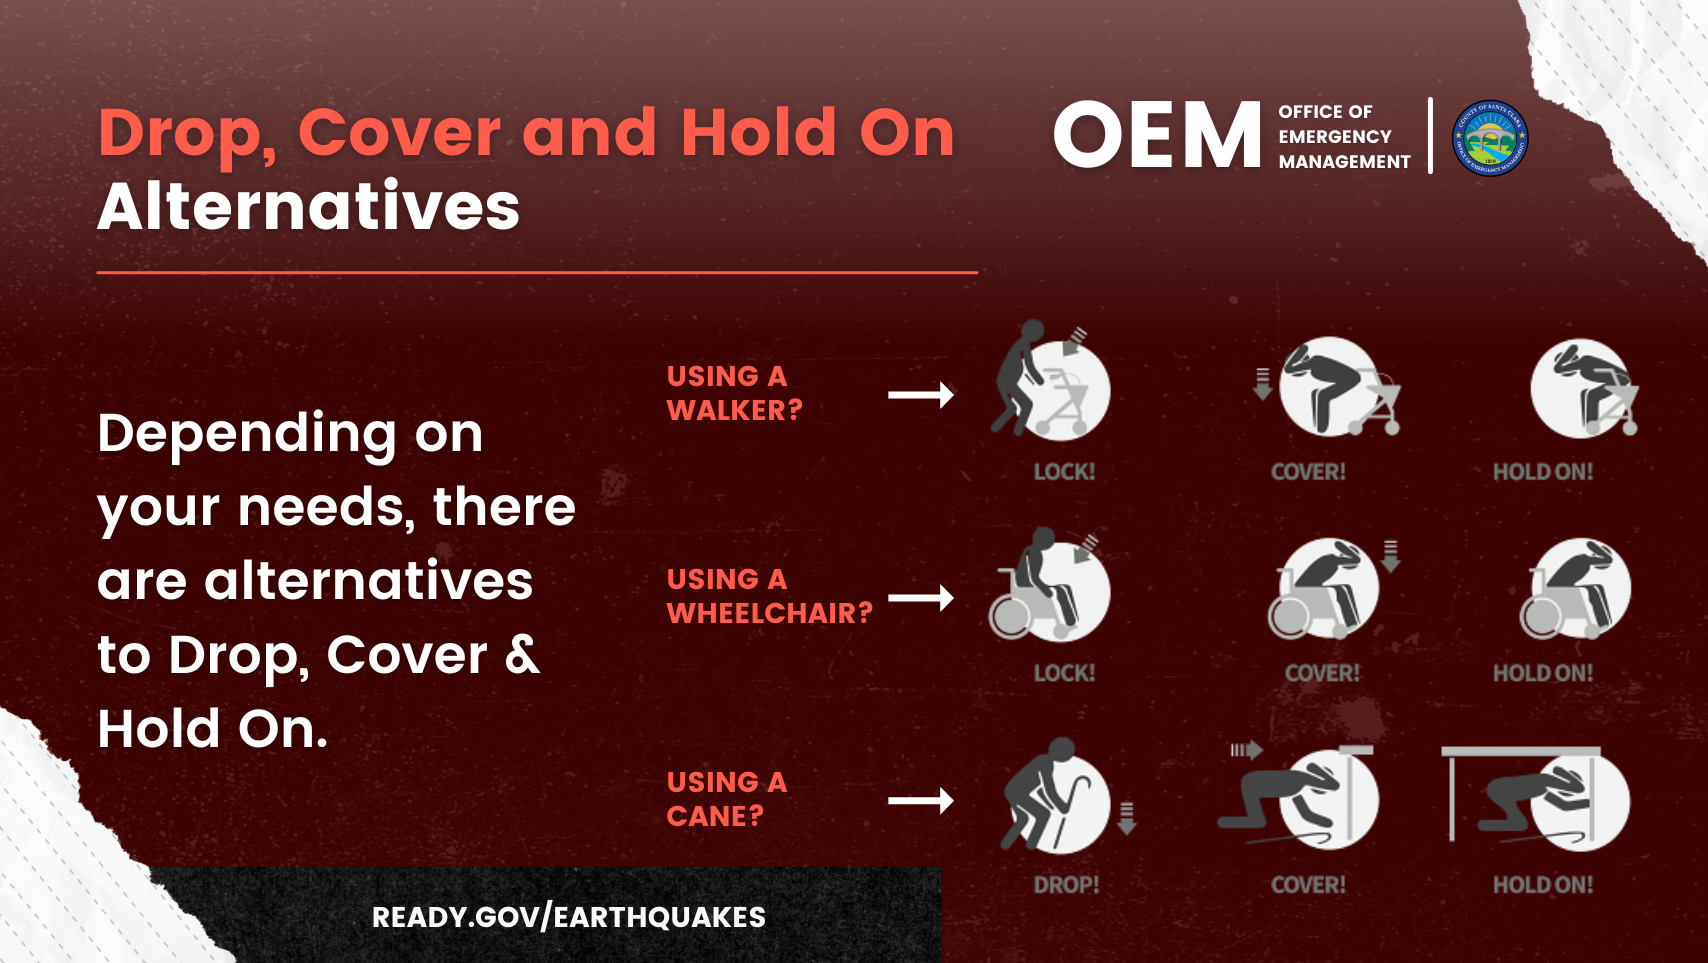 Drop, Cover, and Hold On Alternatives